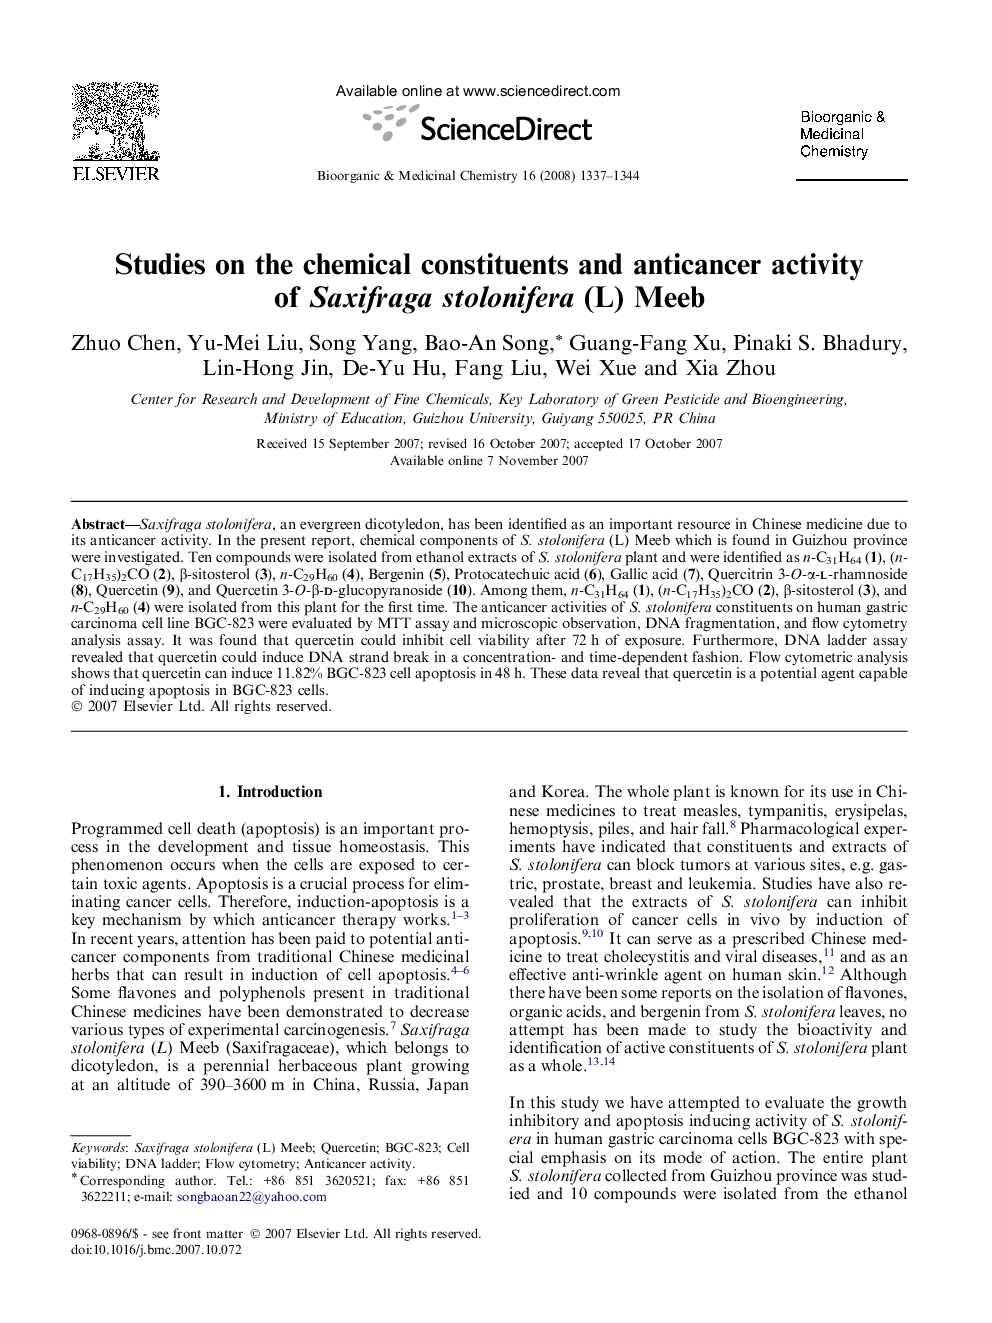 Studies on the chemical constituents and anticancer activity of Saxifraga stolonifera (L) Meeb